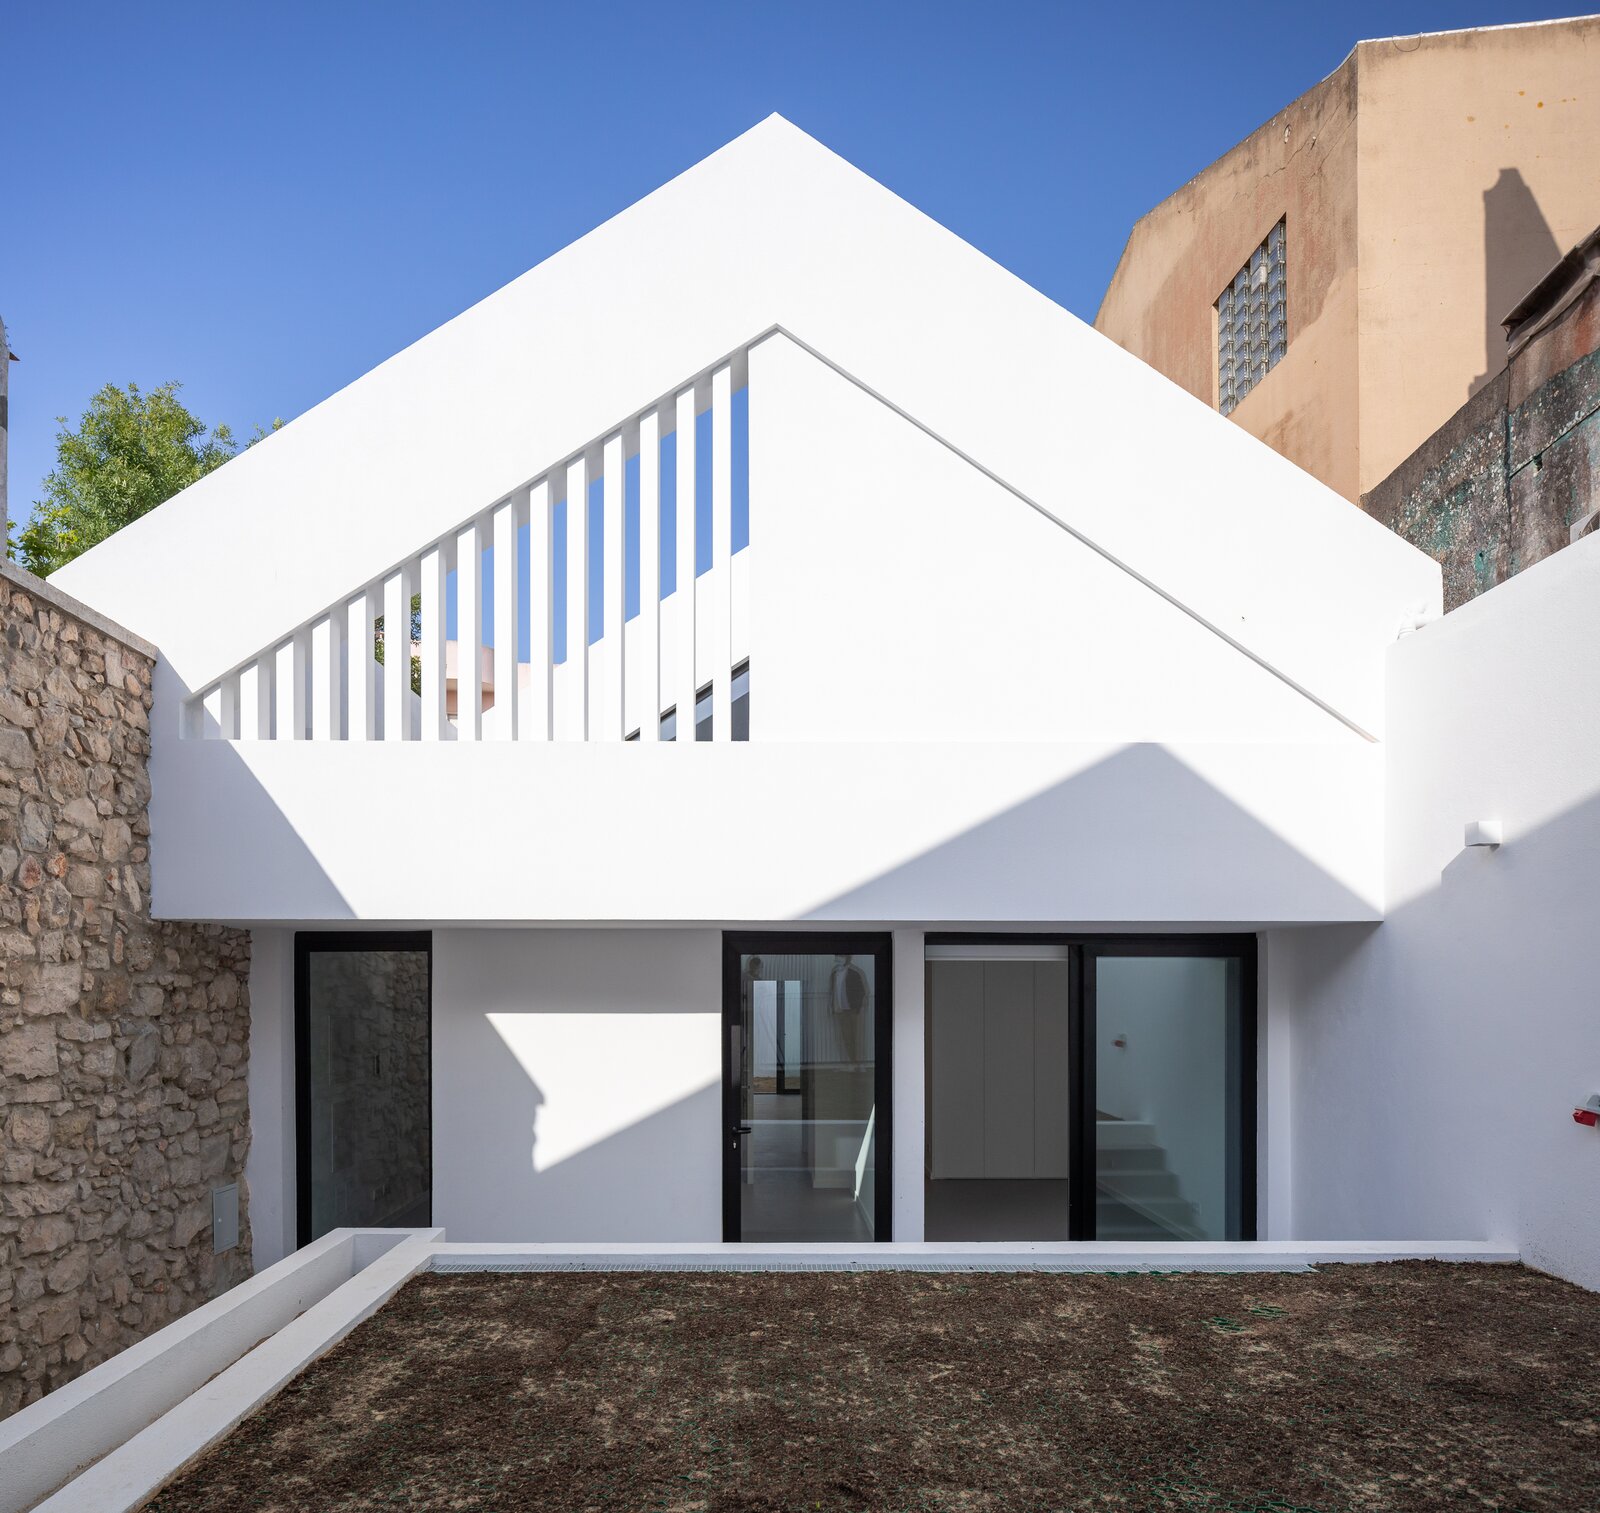 An 18th-Century Sawmill in Portugal Is Revived as a Striking White Gable Home